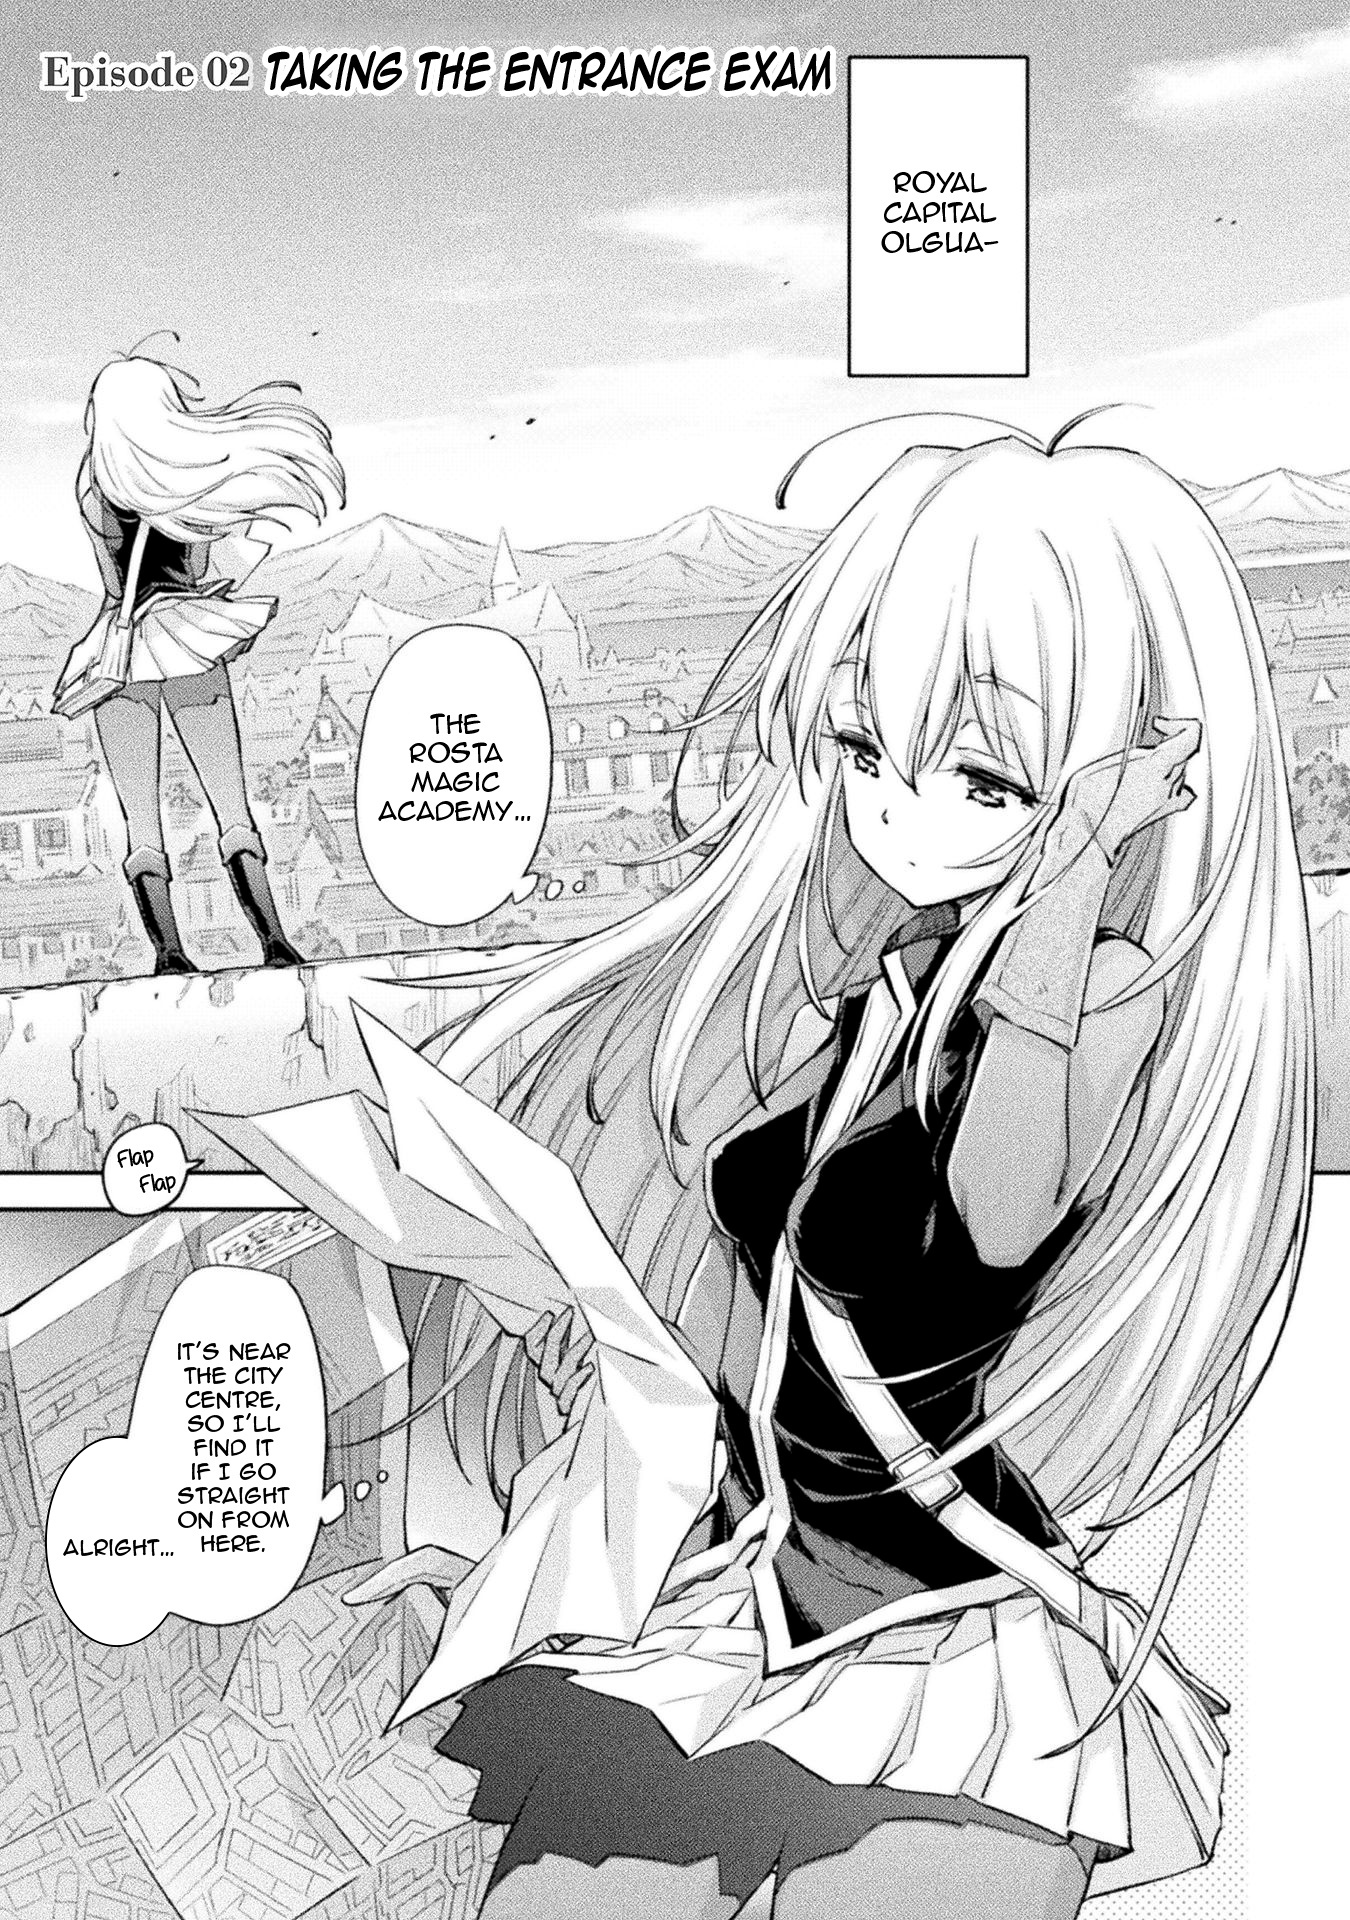 School Life Of A Mercenary Girl Vol.1 Chapter 2: Taking The Entrance Exam - Picture 1